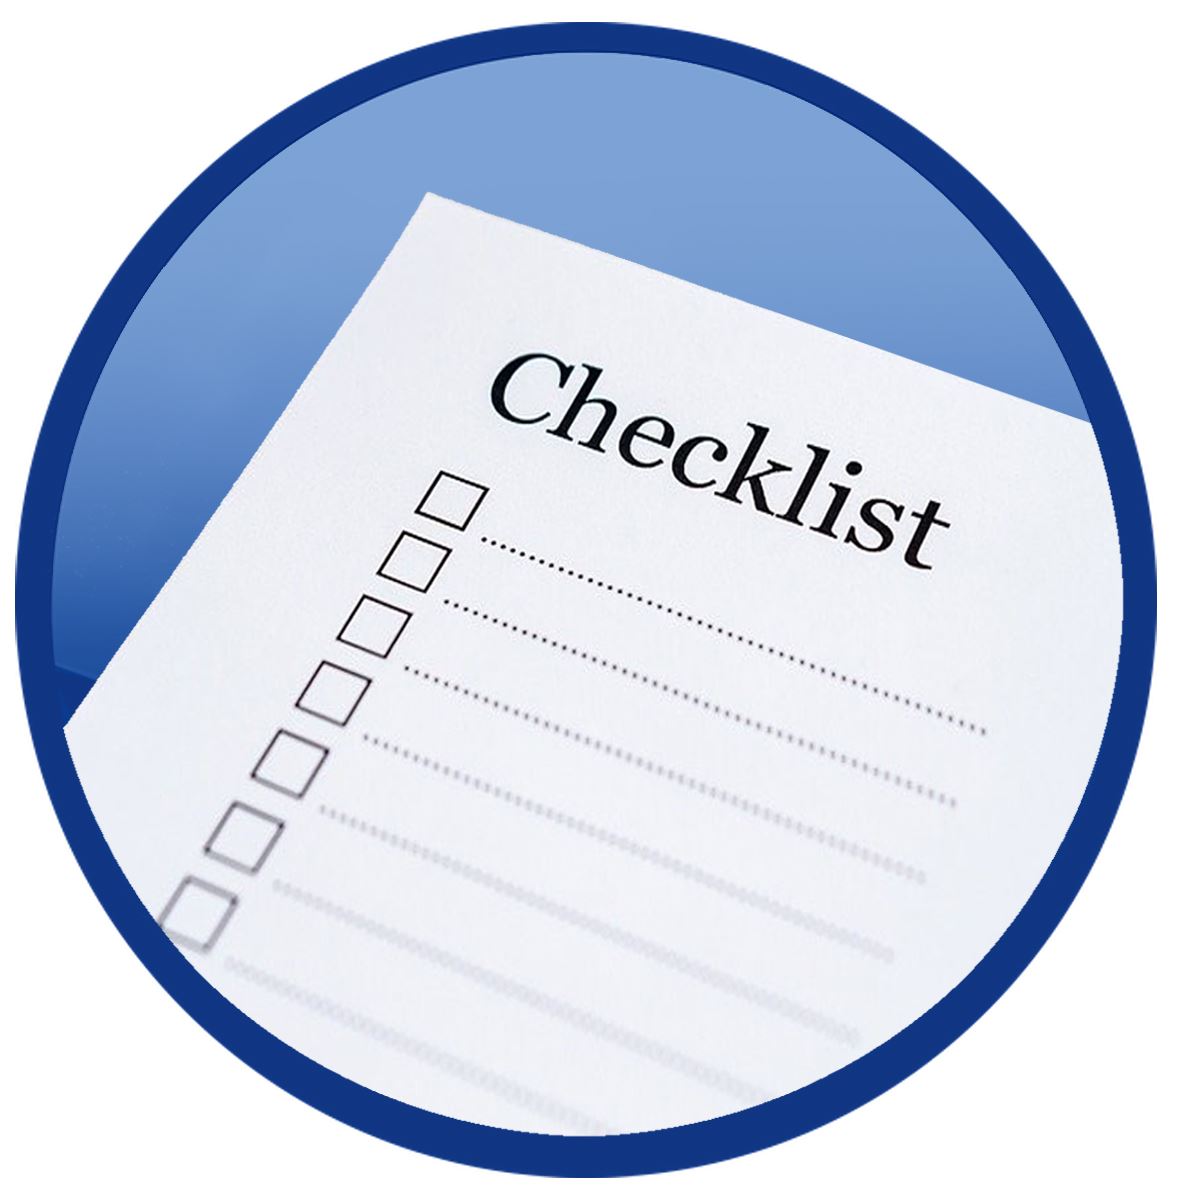 Checklist Icon takes you to forms and checklists page